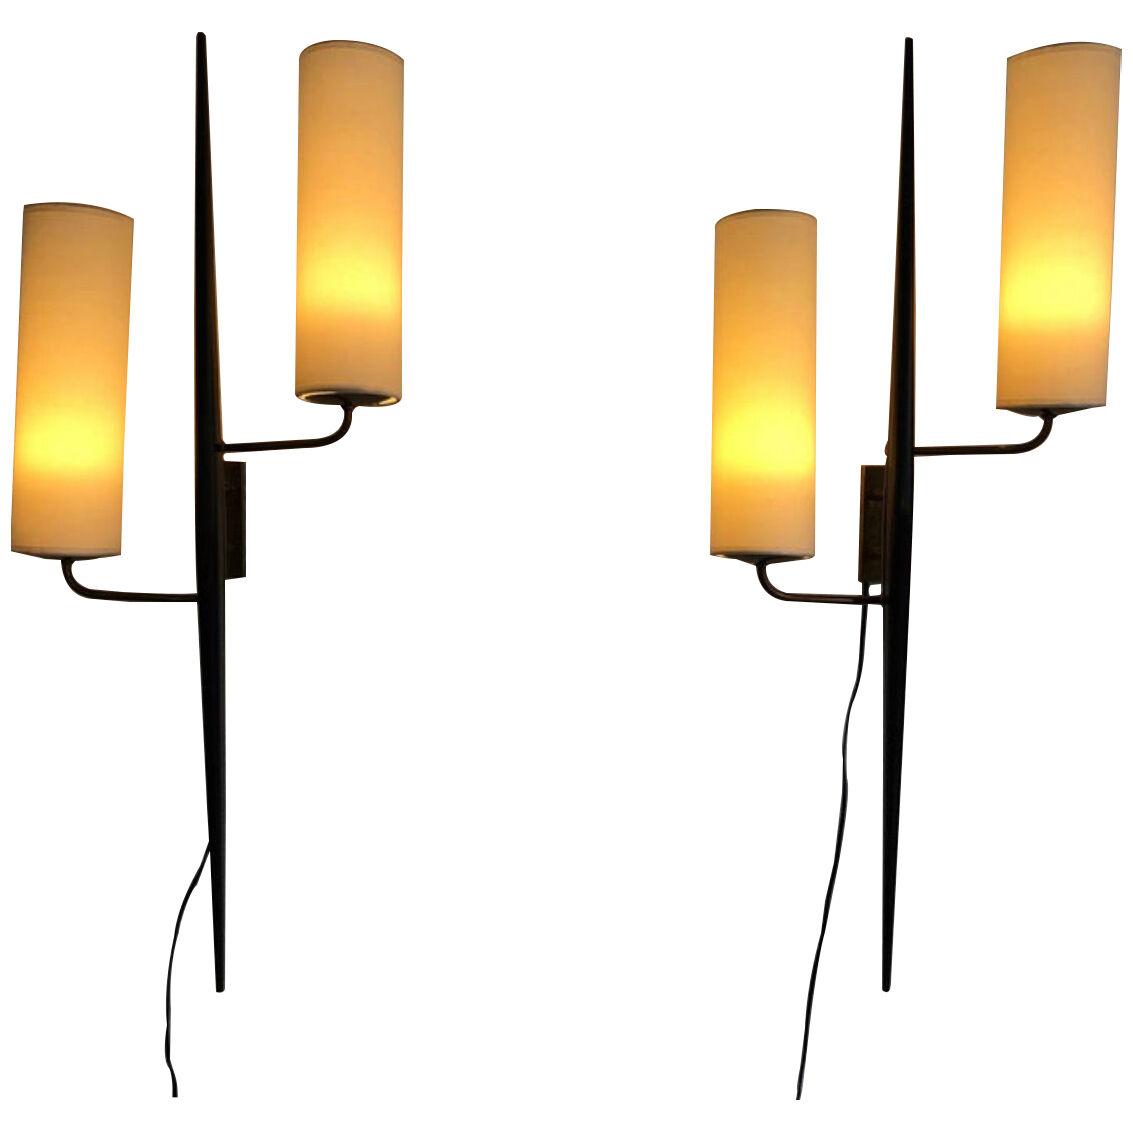 Pair of sconces by Maison Arlus